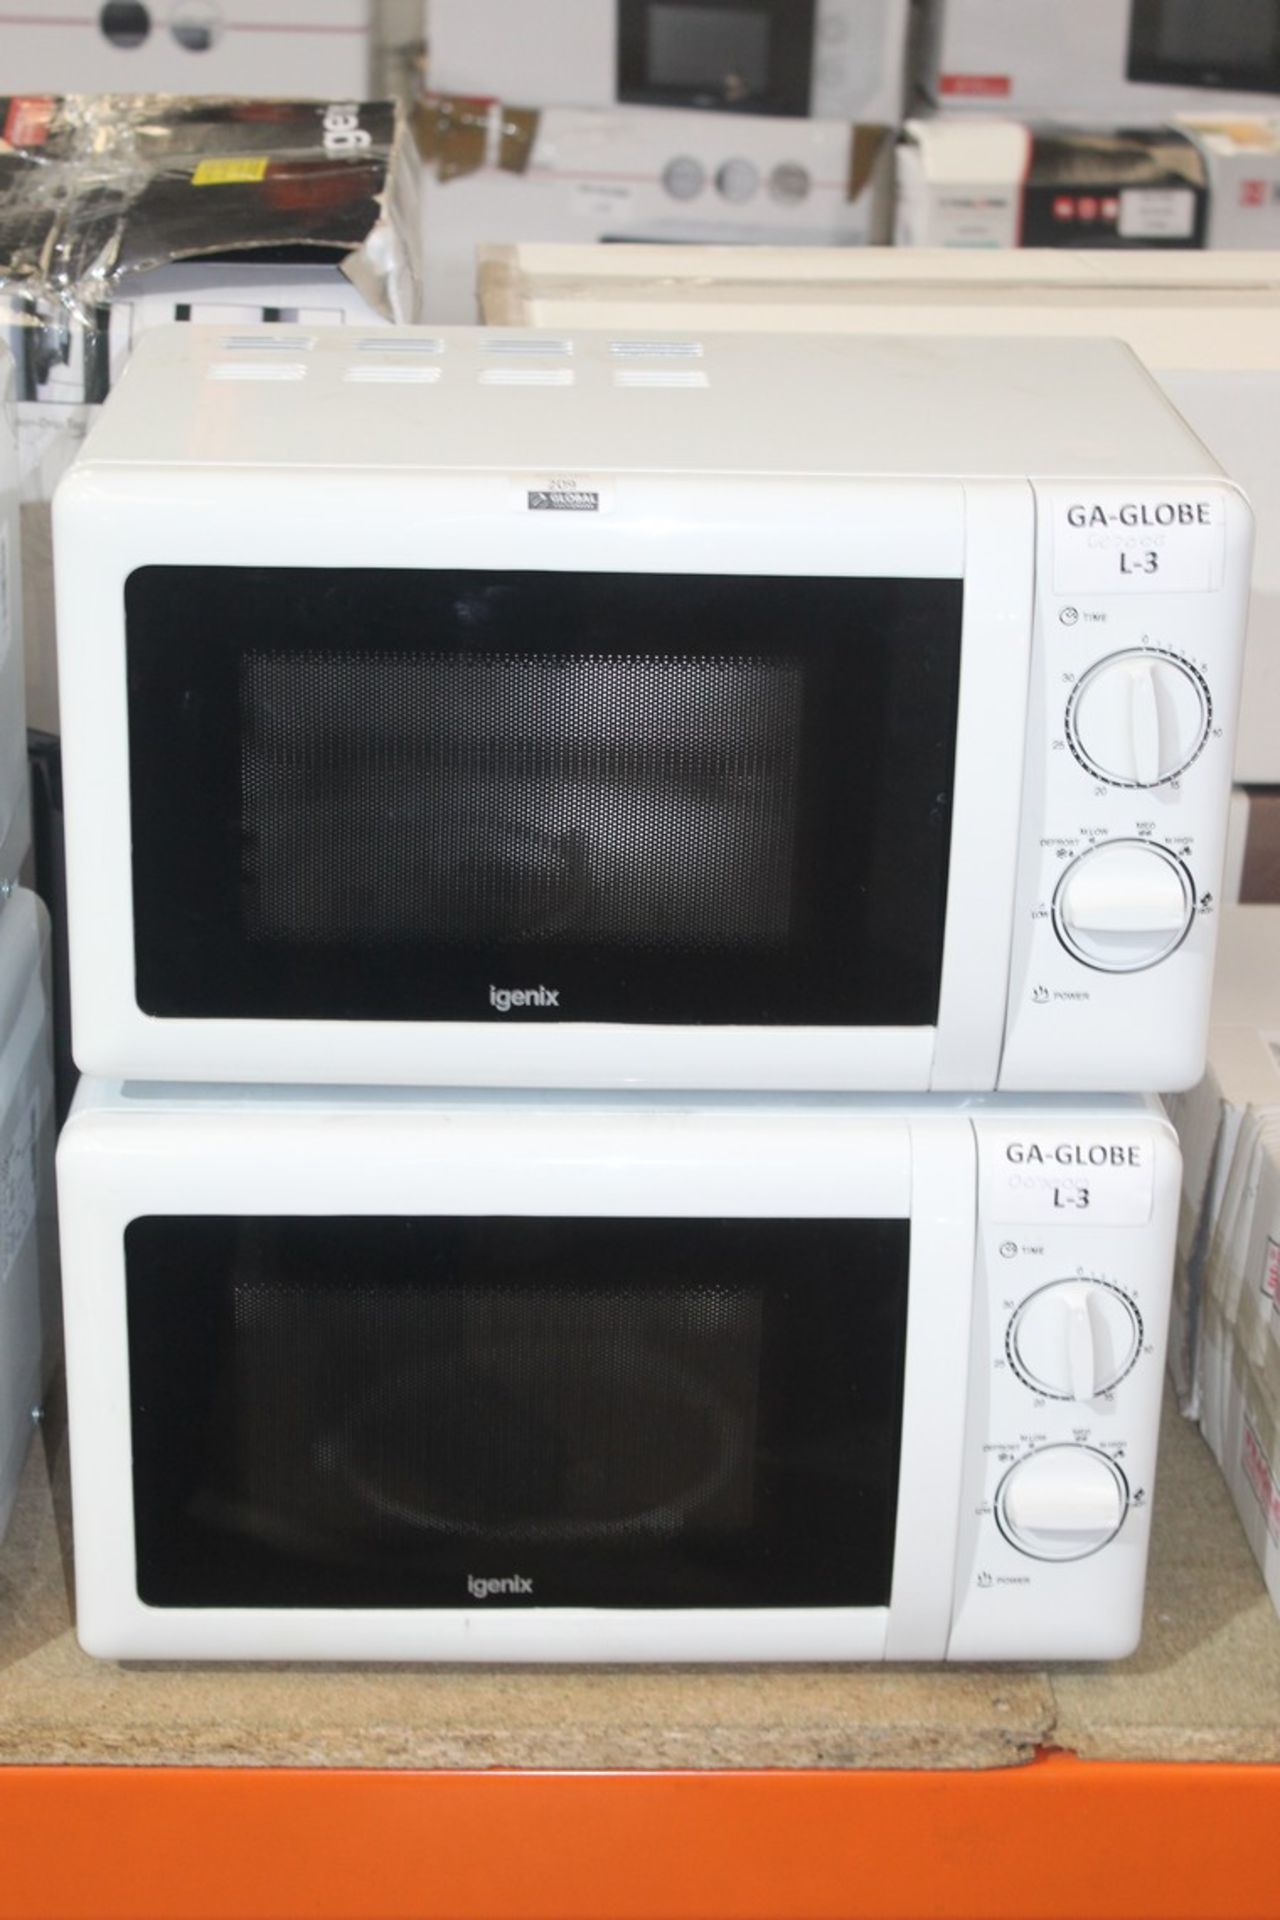 Igenix Counter Top Manual Microwaves RRP £70 Each (Appraisals Available Upon Request) (Untested